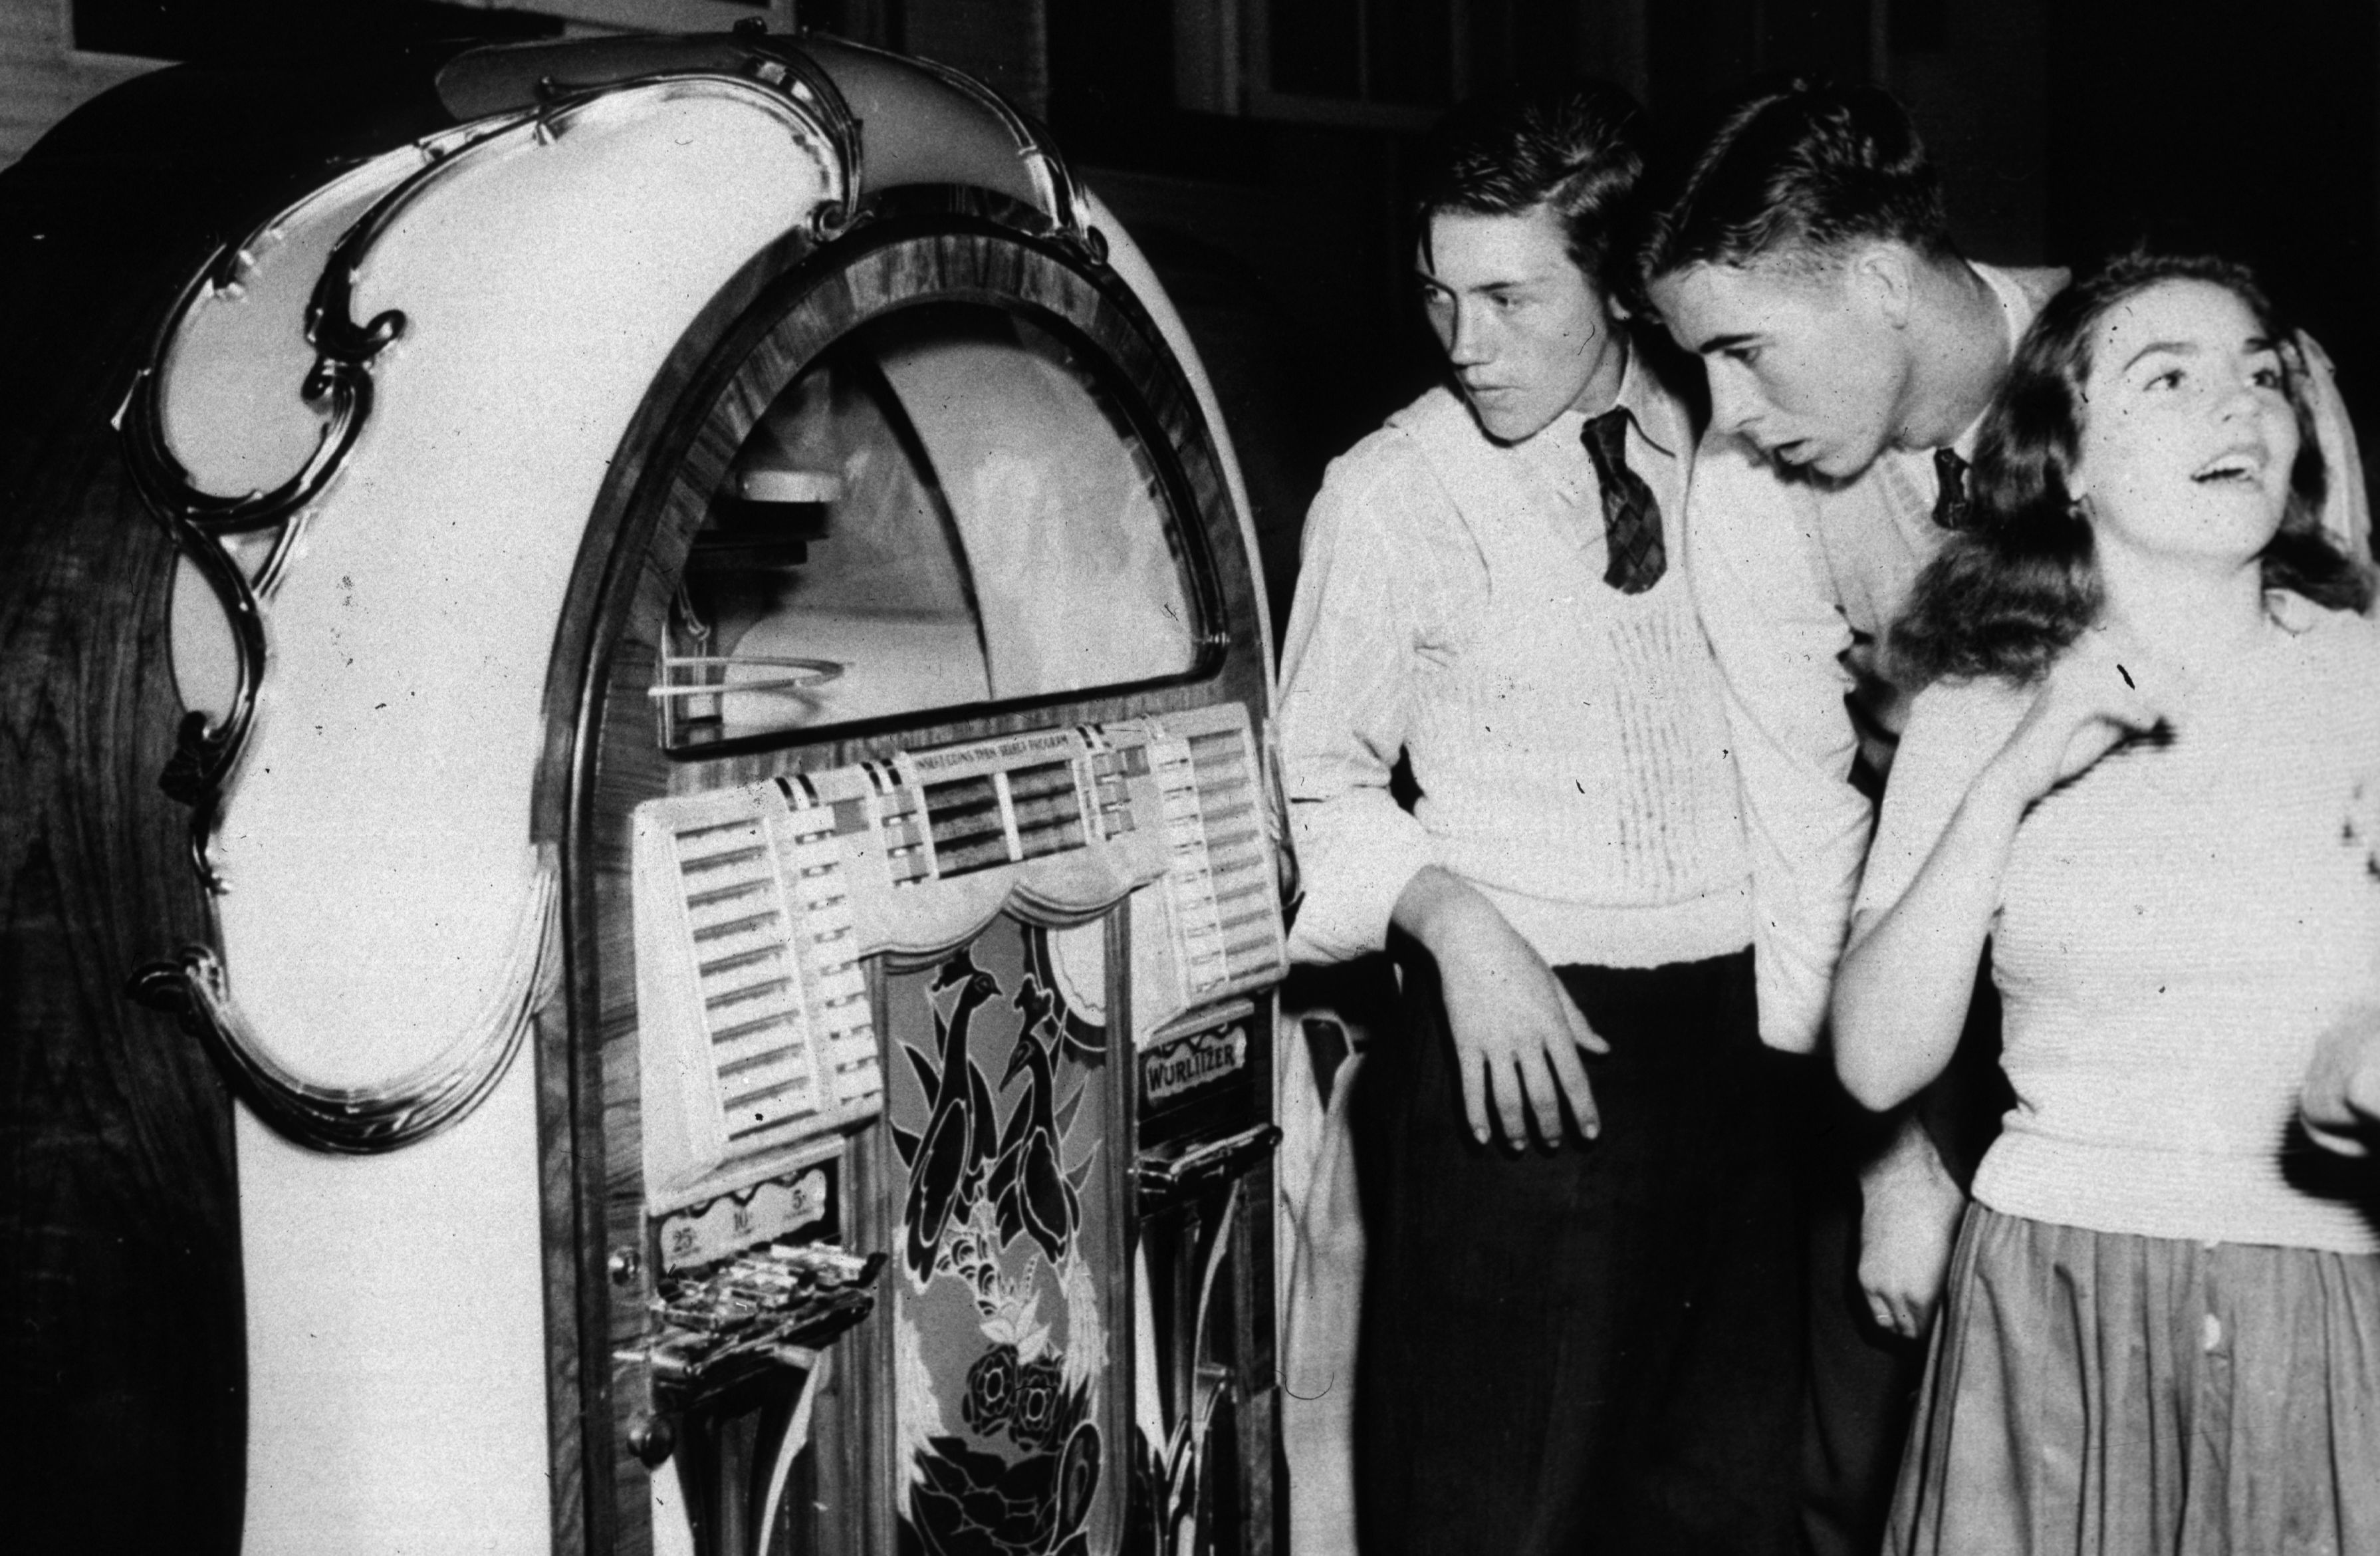 Opinion: Don't mess with the jukebox